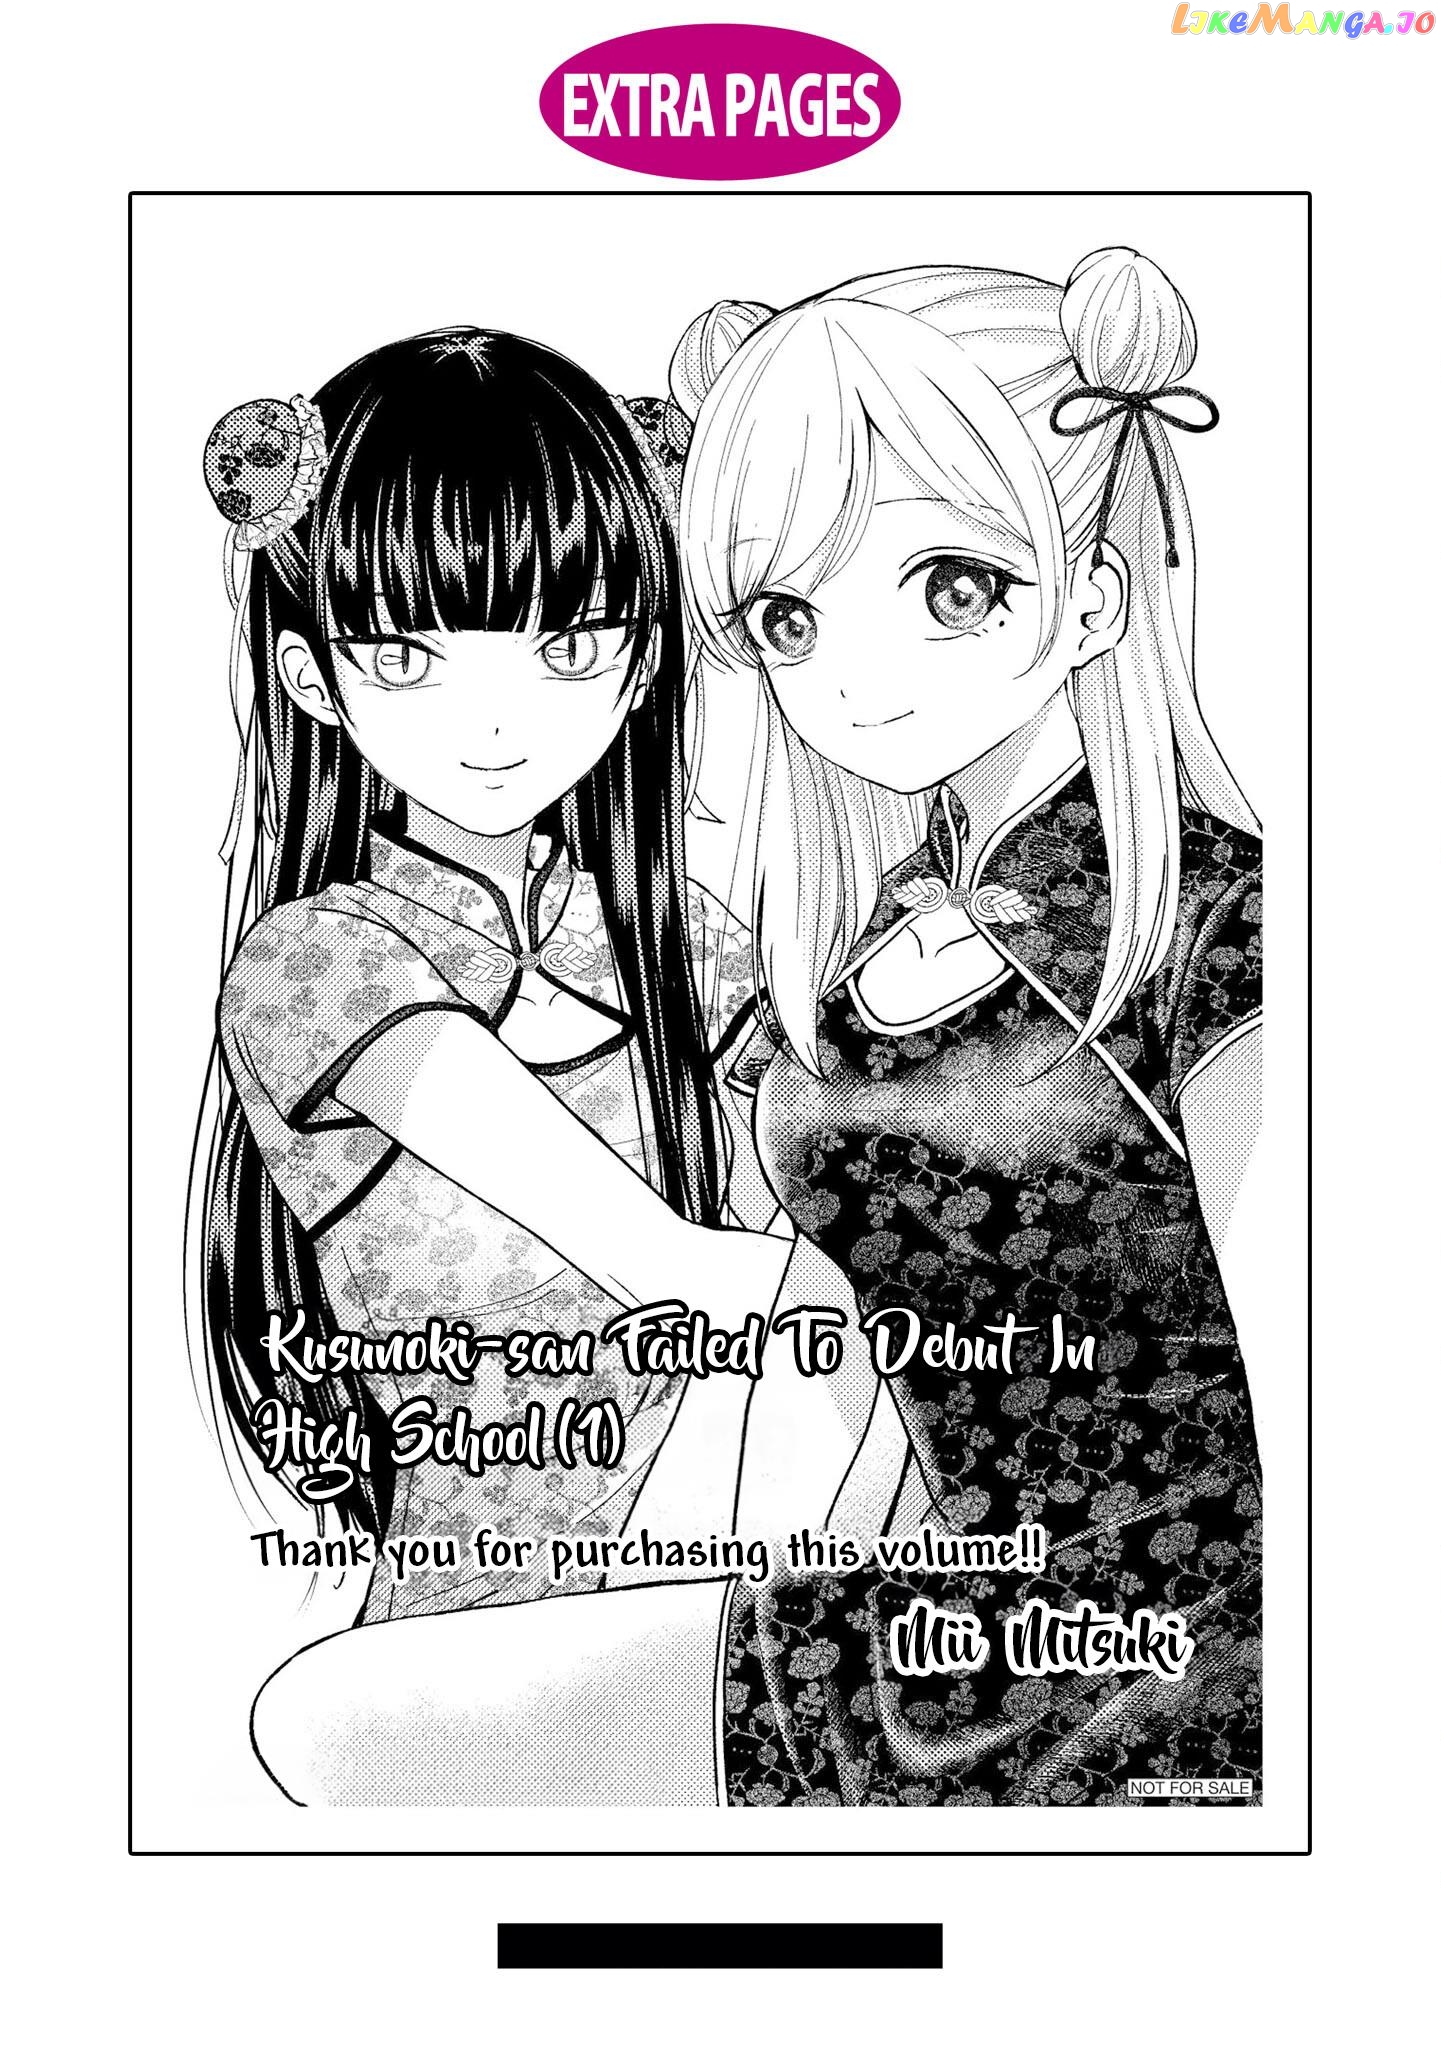 Kusunoki-San Failed To Debut In High School chapter 7.5 - page 16